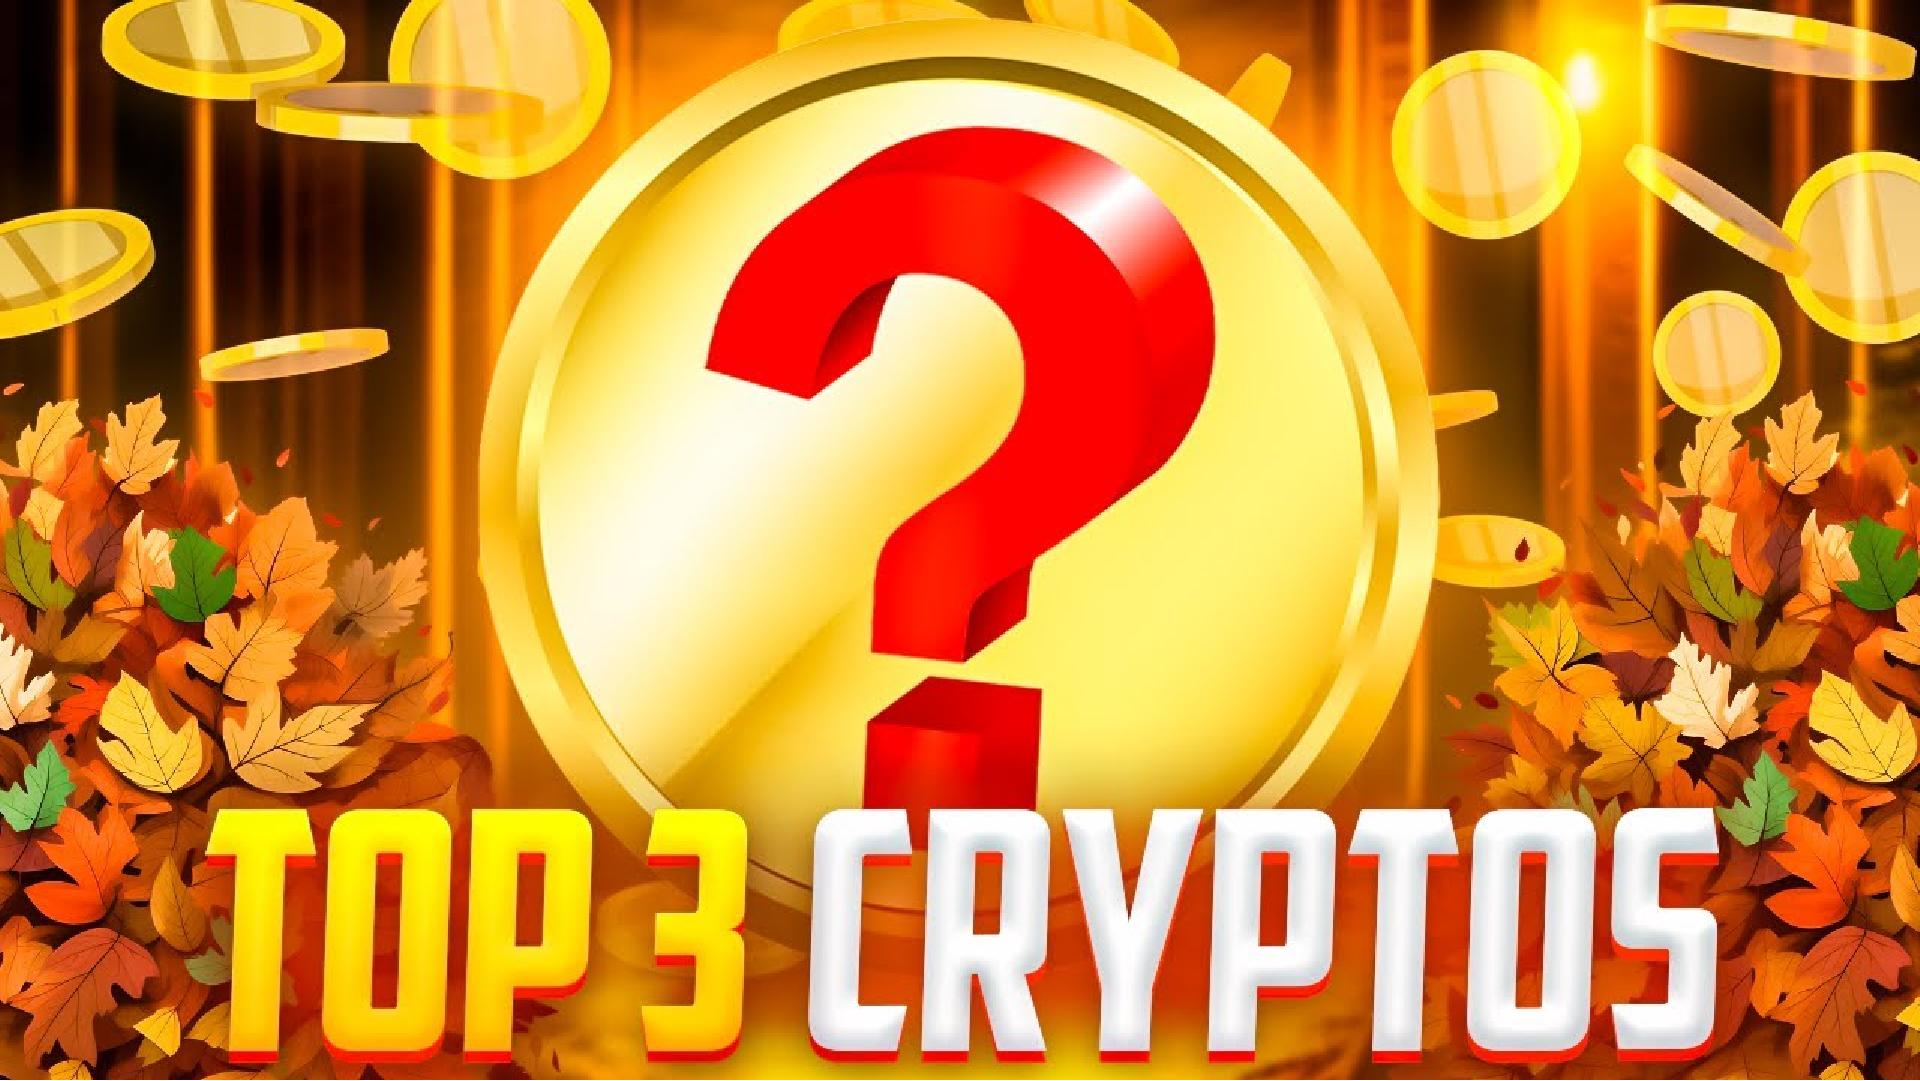 Top 3 Crypto Gems That Could Blow Up This September